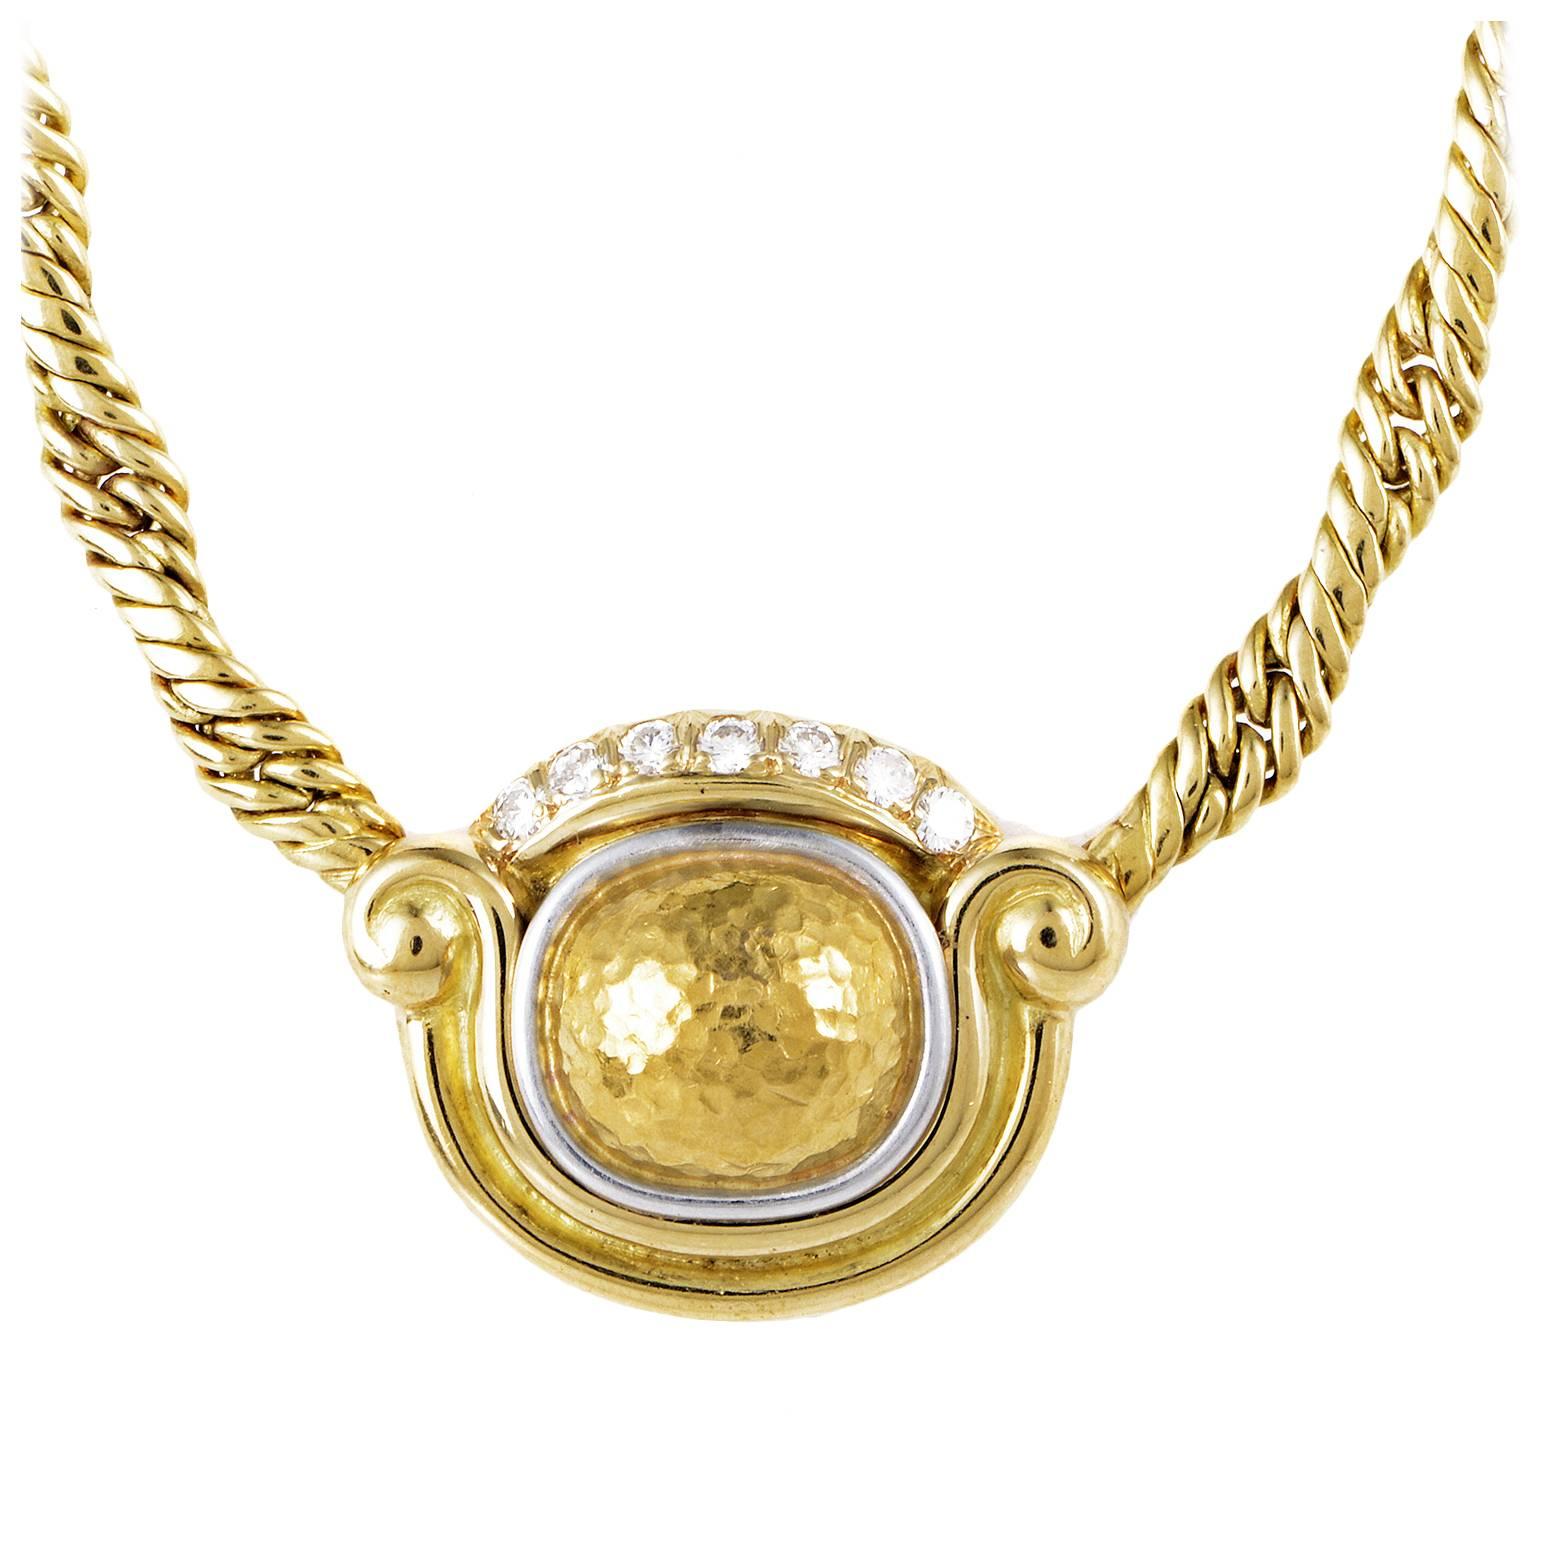 Chaumet Diamond Hammered Gold Pendant Necklace